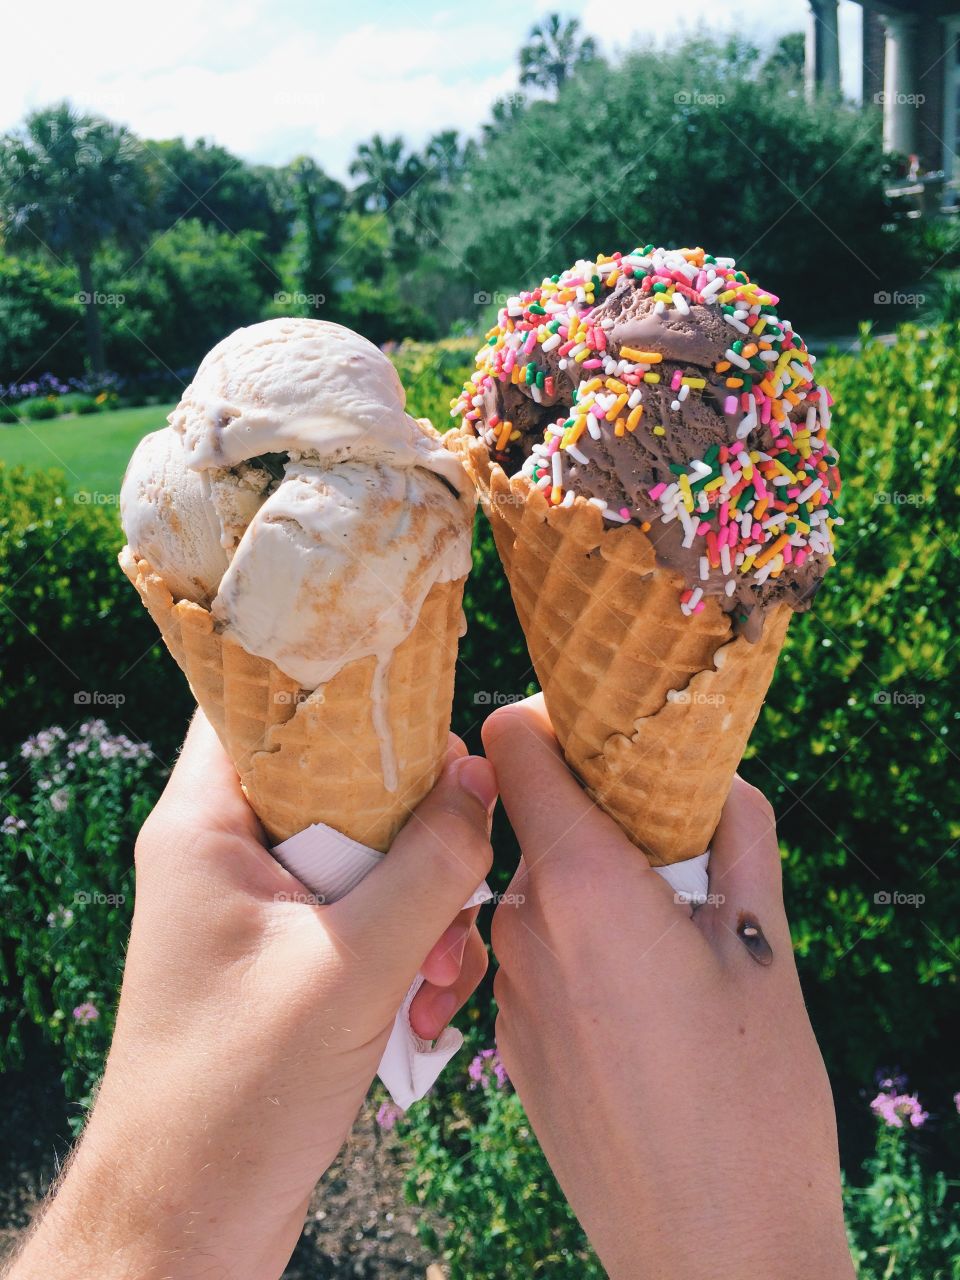 Ice Cream and Hands